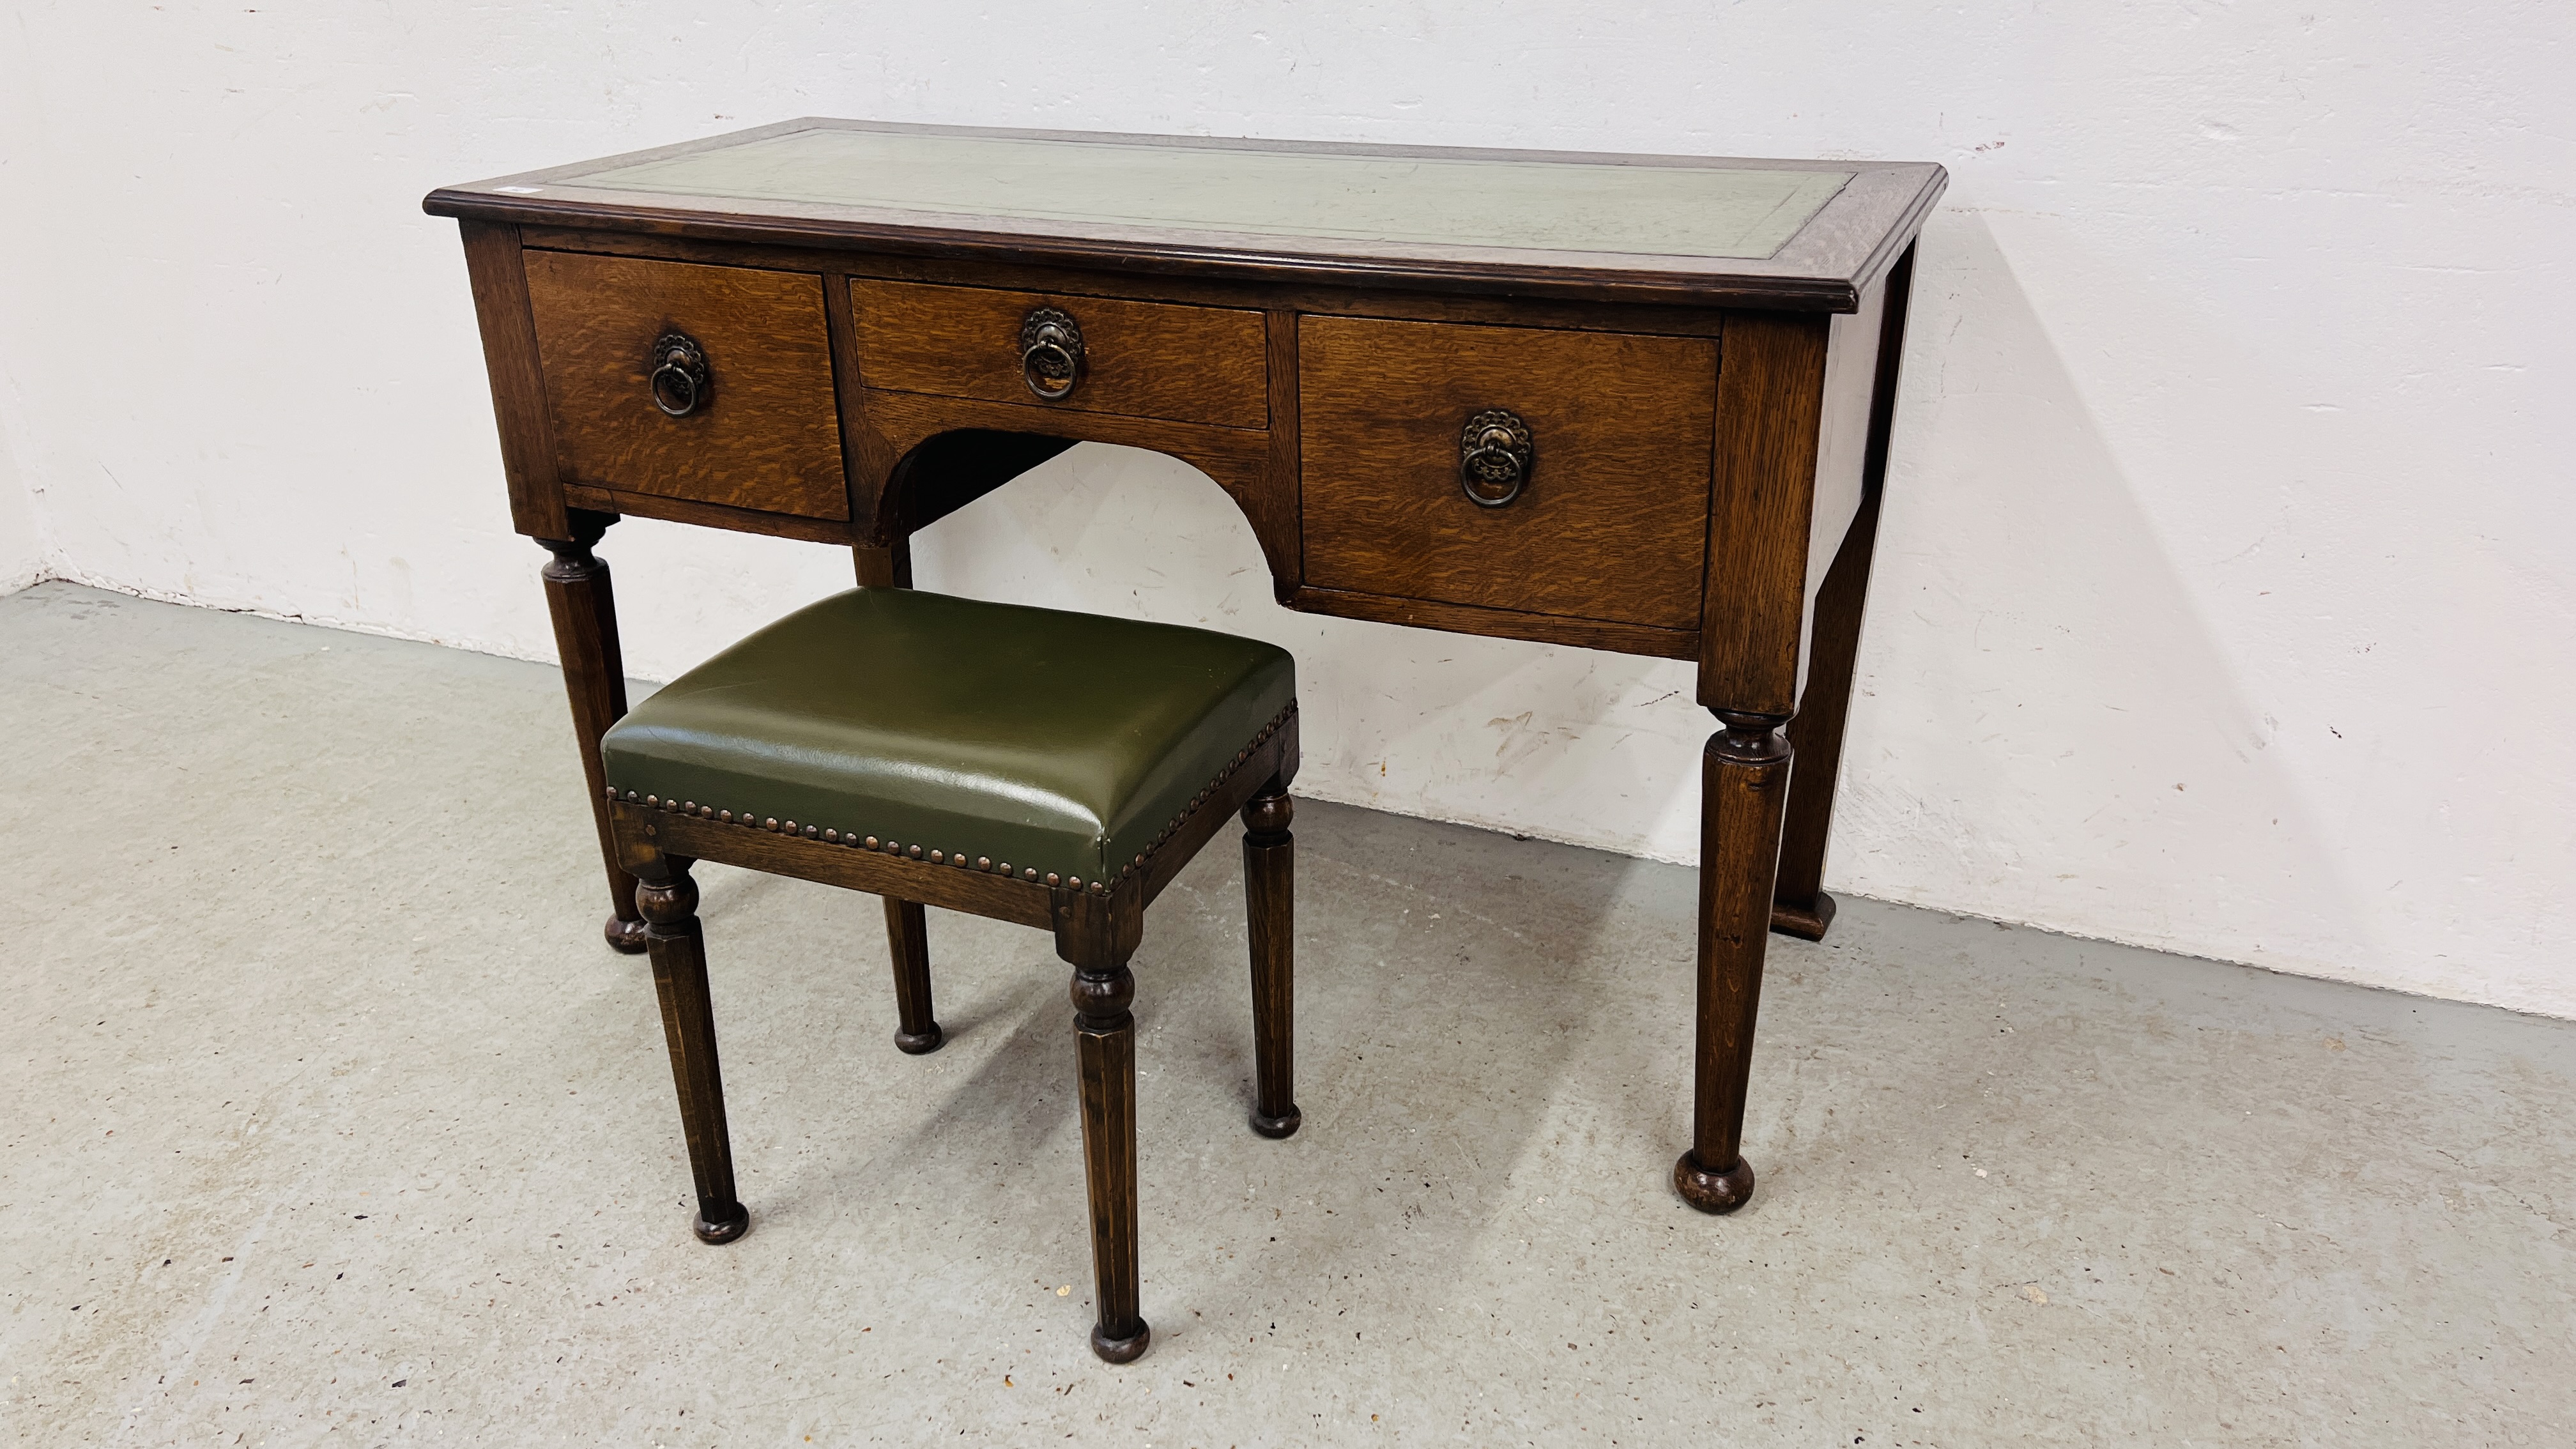 A SOLID OAK THREE DRAWER WRITING DESK WITH GREEN TOOLED LEATHERETTE WRITING SURFACE, W 120CM,